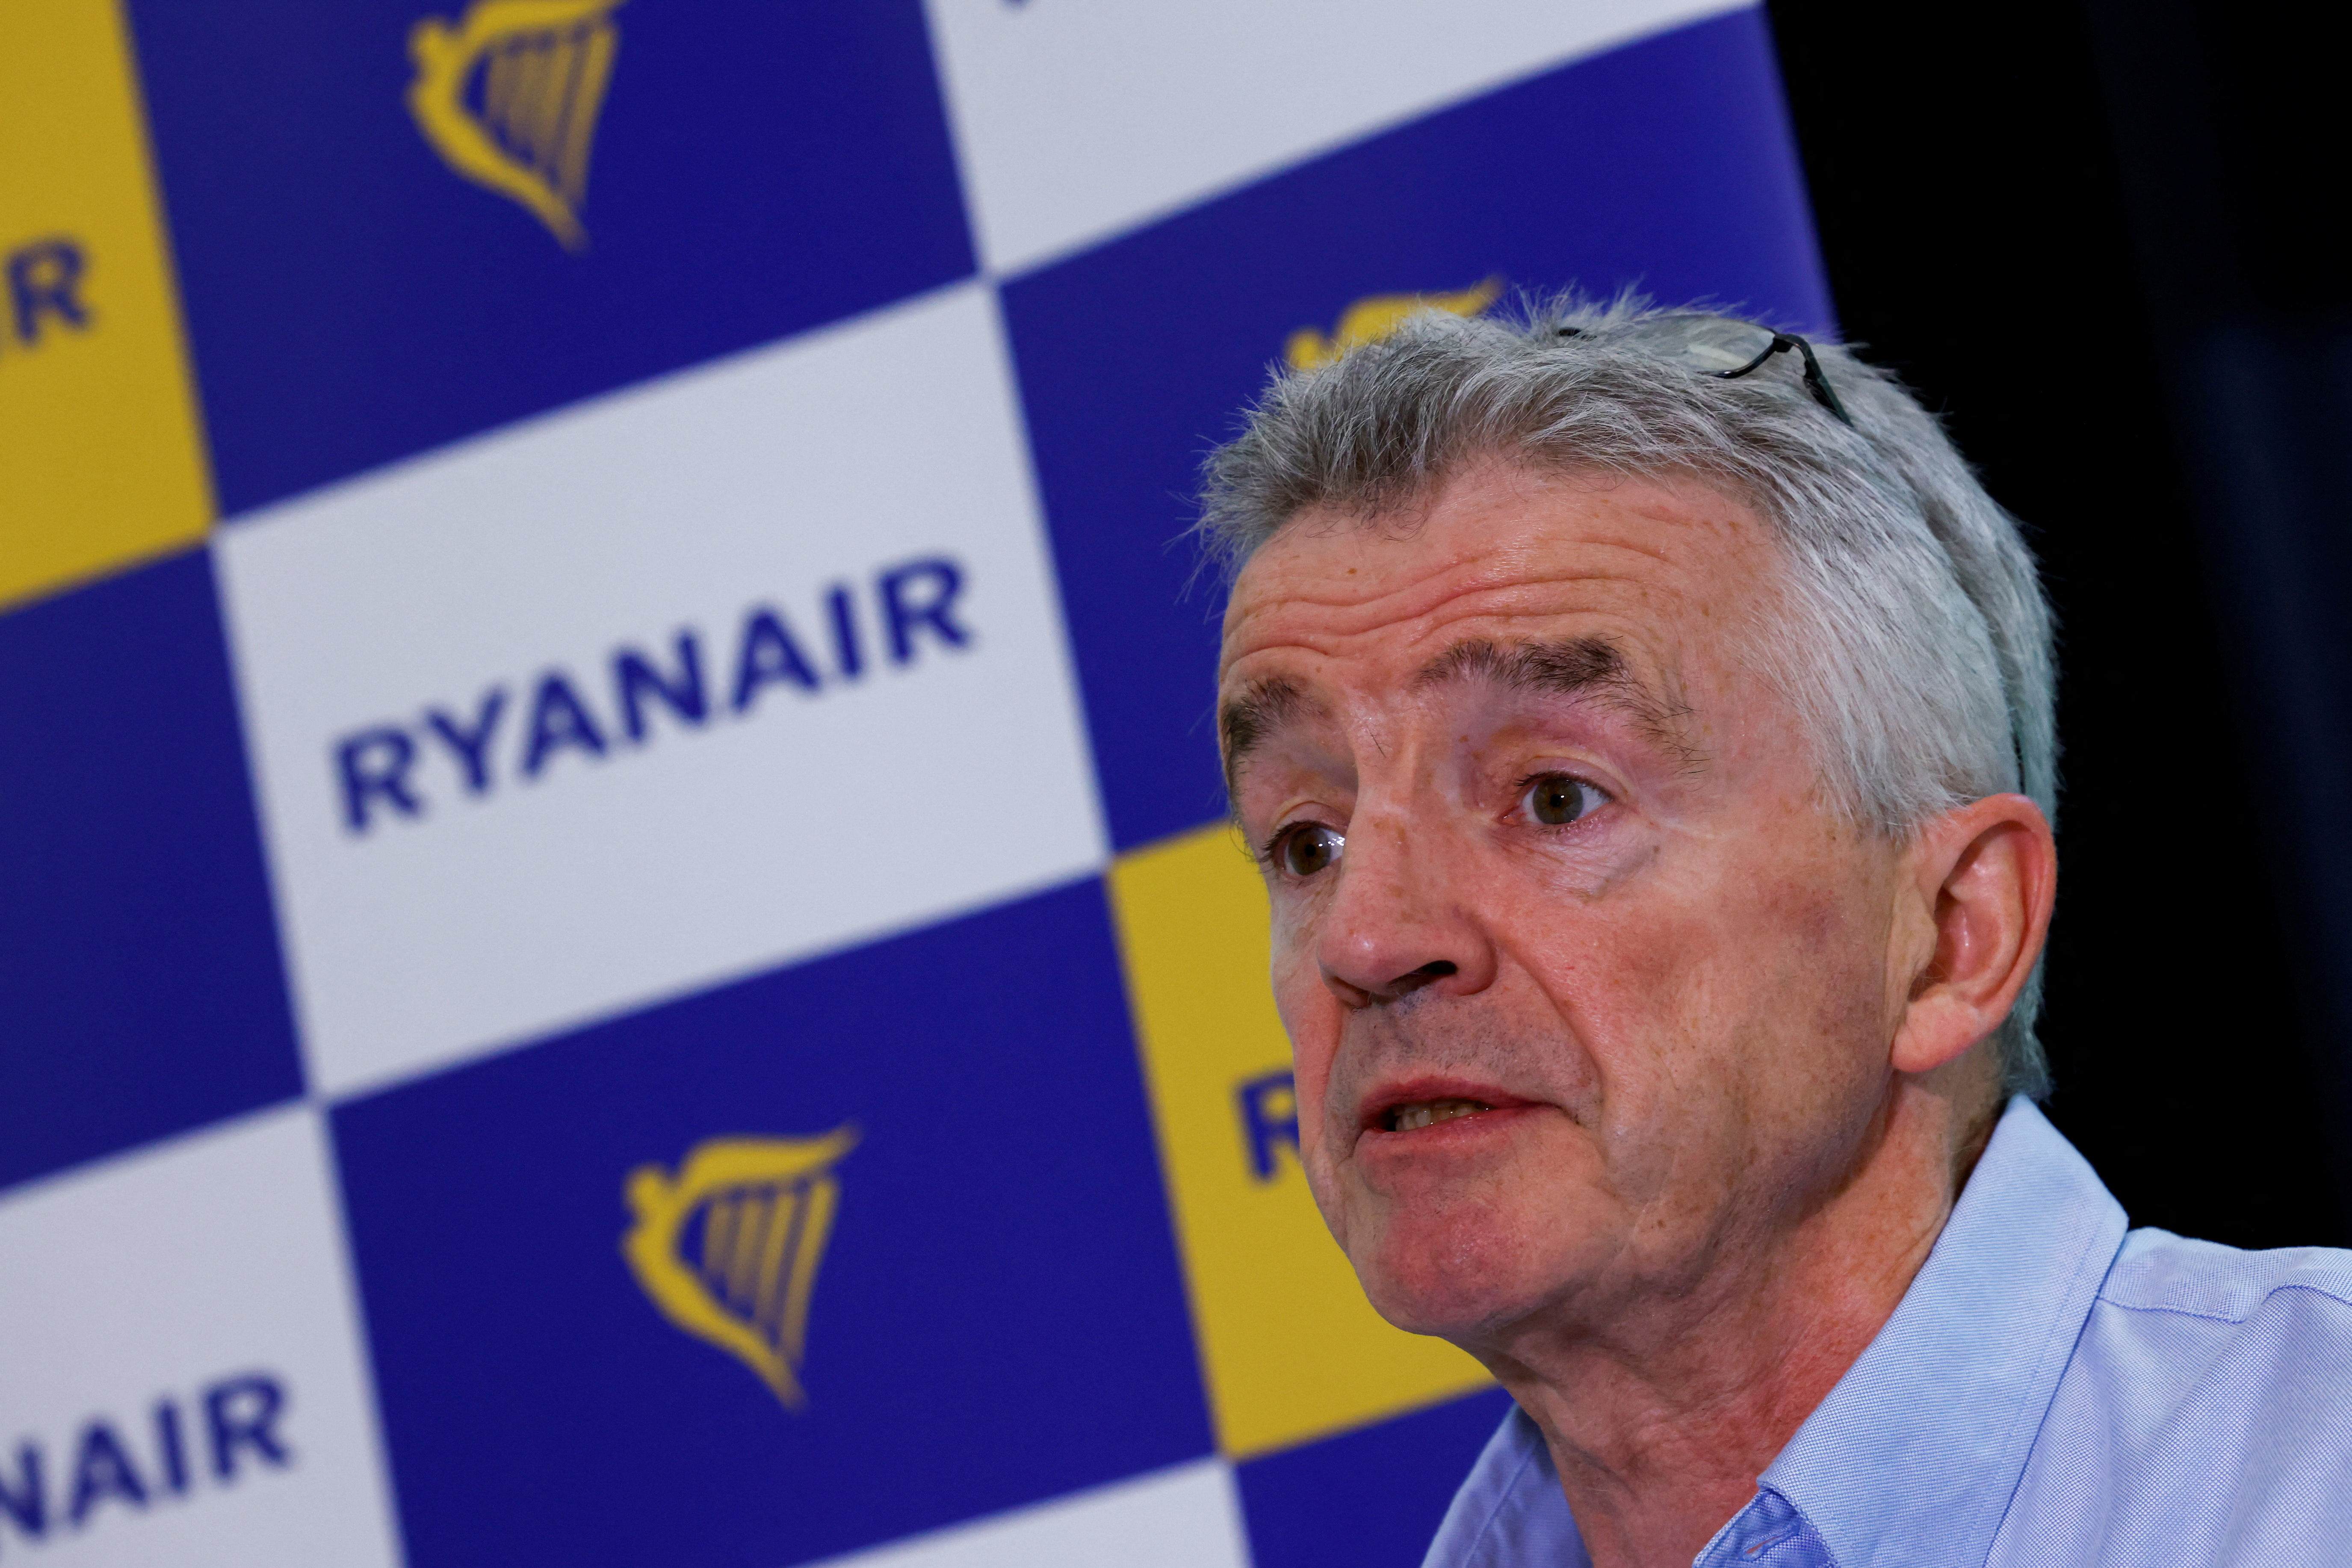 Ryanair CEO holds a news conference on EU climate change policies, in Brussels